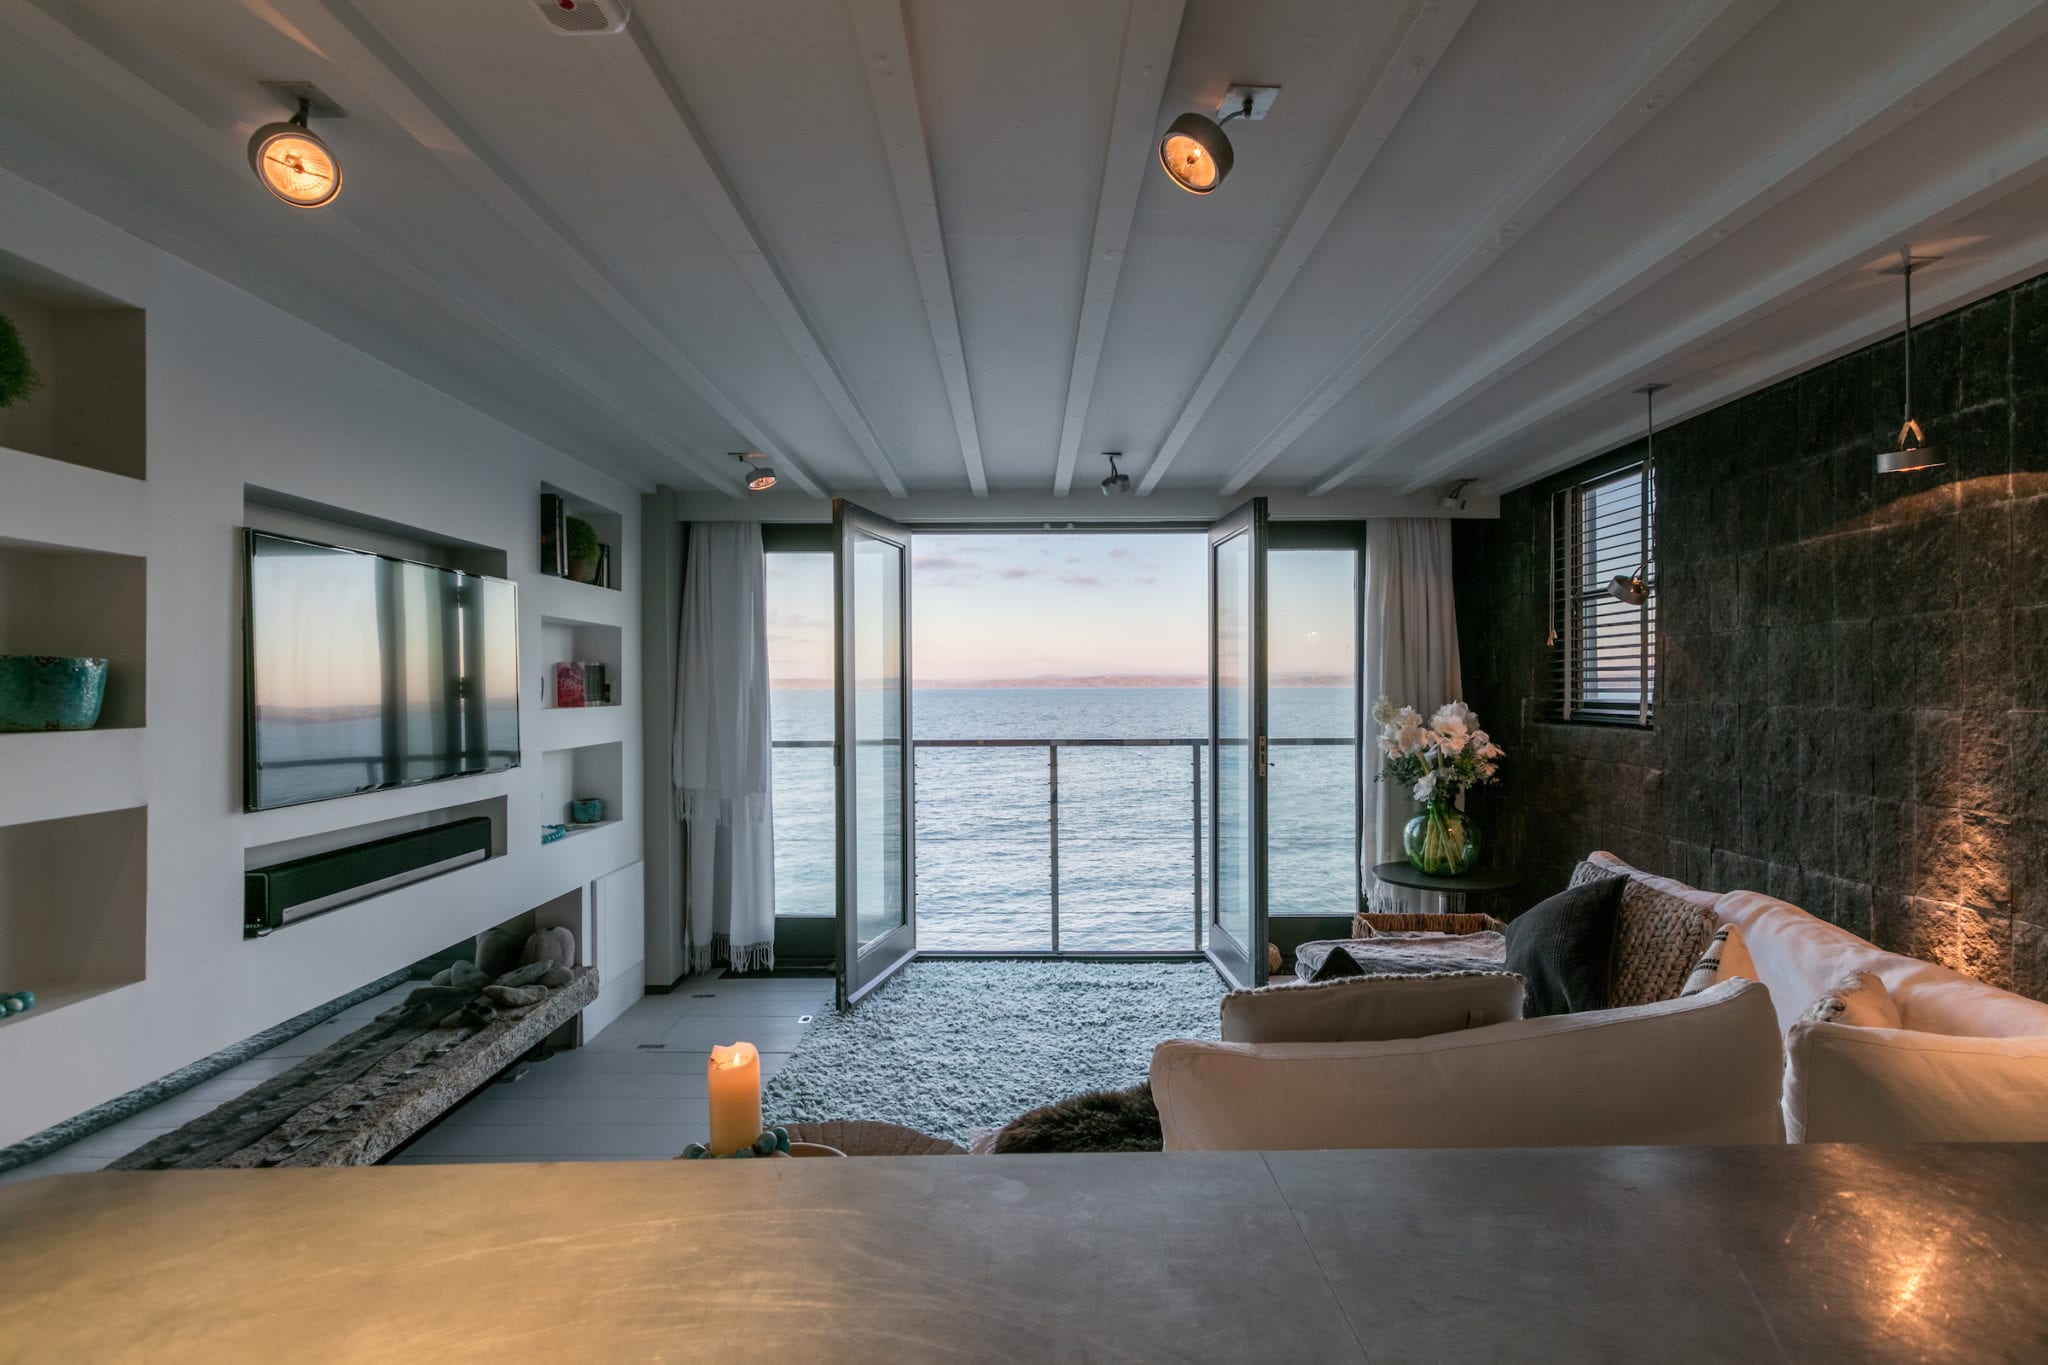 Black Moon's warmly lit living room with sea views, a large sofa and a flat screen TV built into the wall